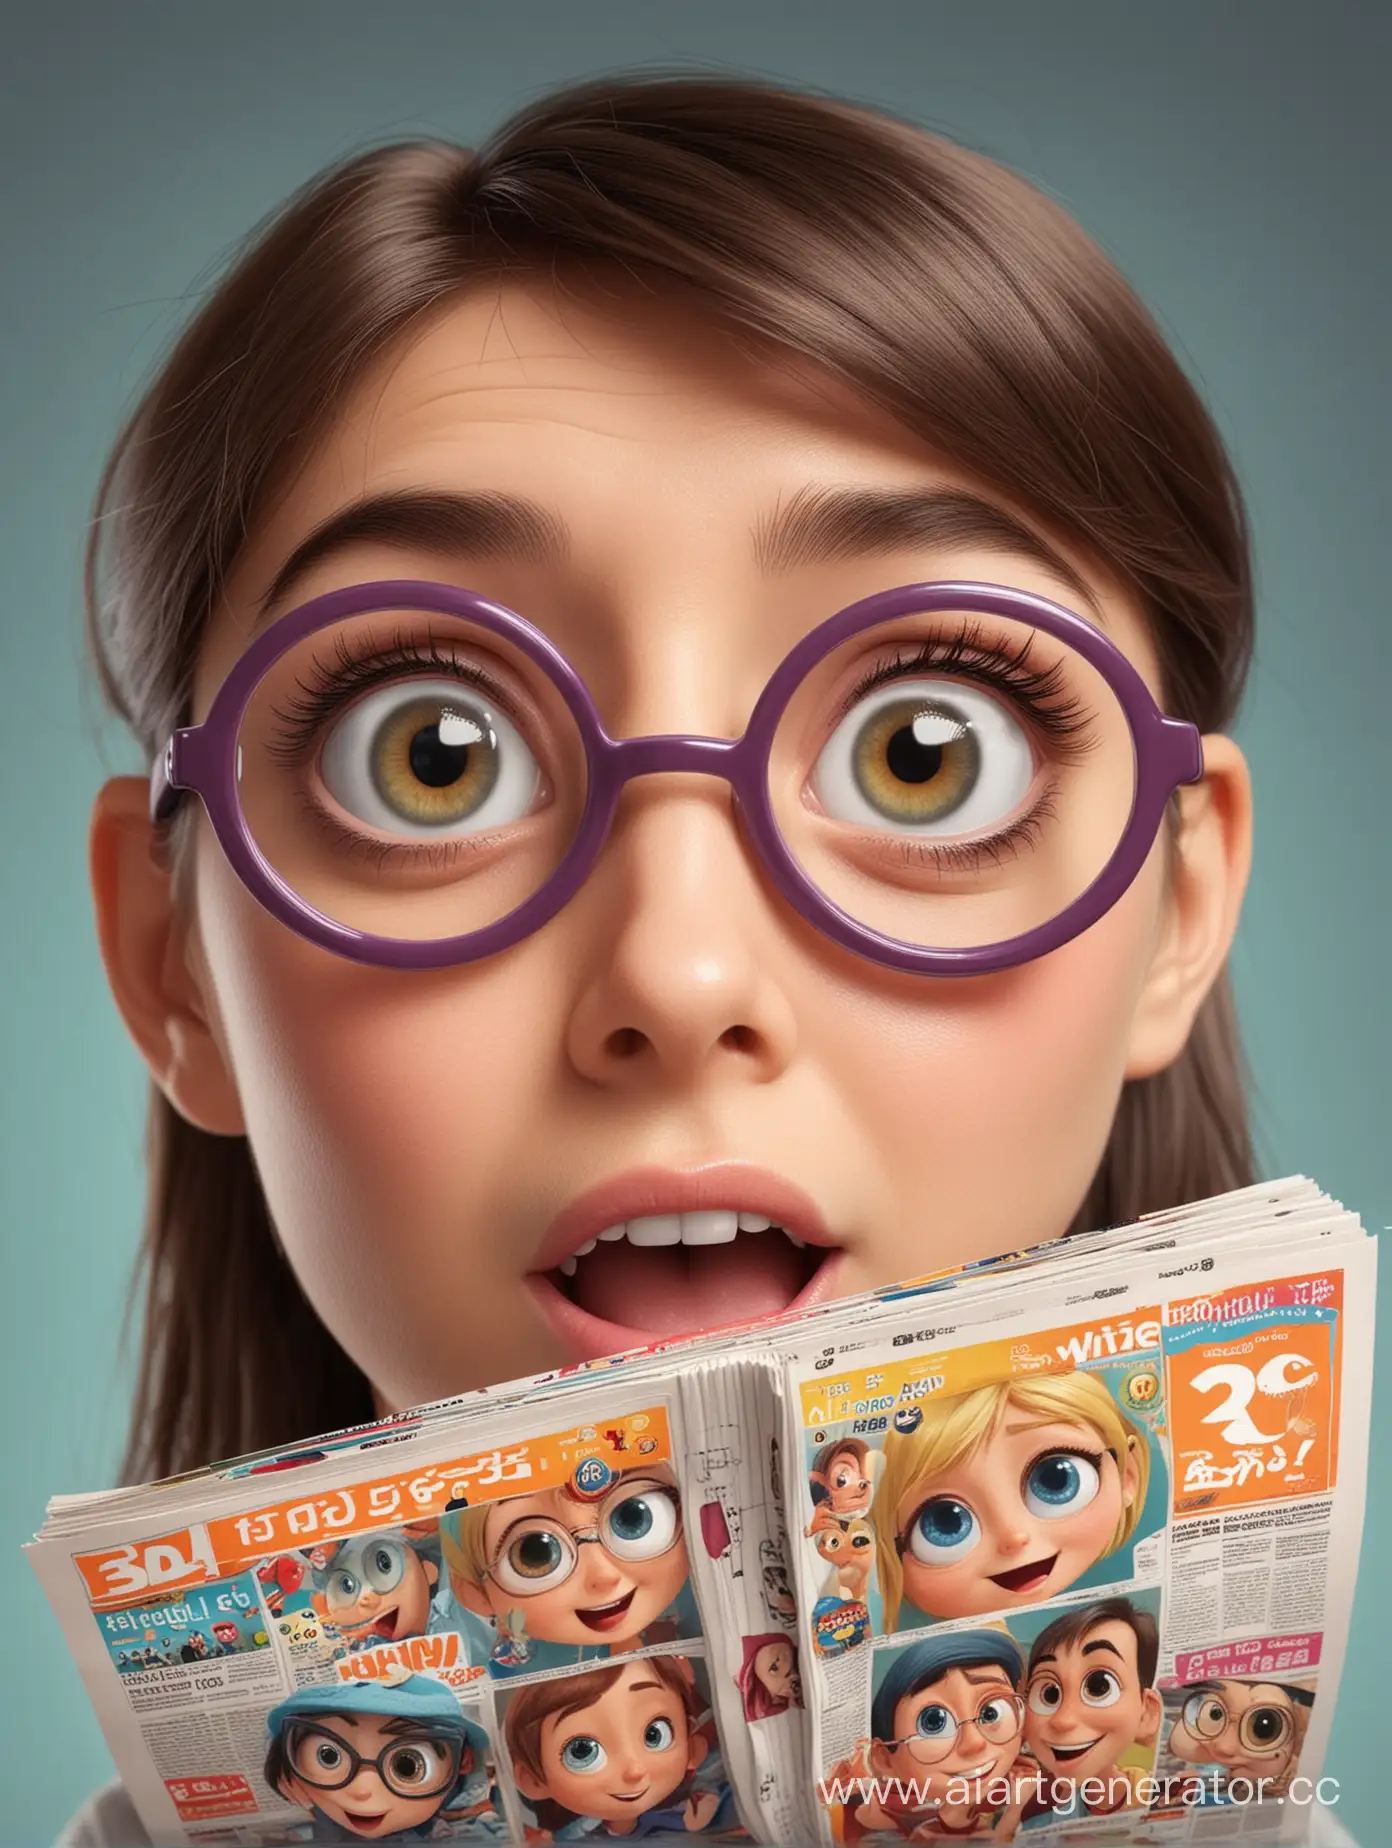 Different three cheerful cartoonish individuals with big eyes looking at magazine with 3d stereo pictures with fun. Ahogao eyes are looking at the magazine 3d stereo pictures. 